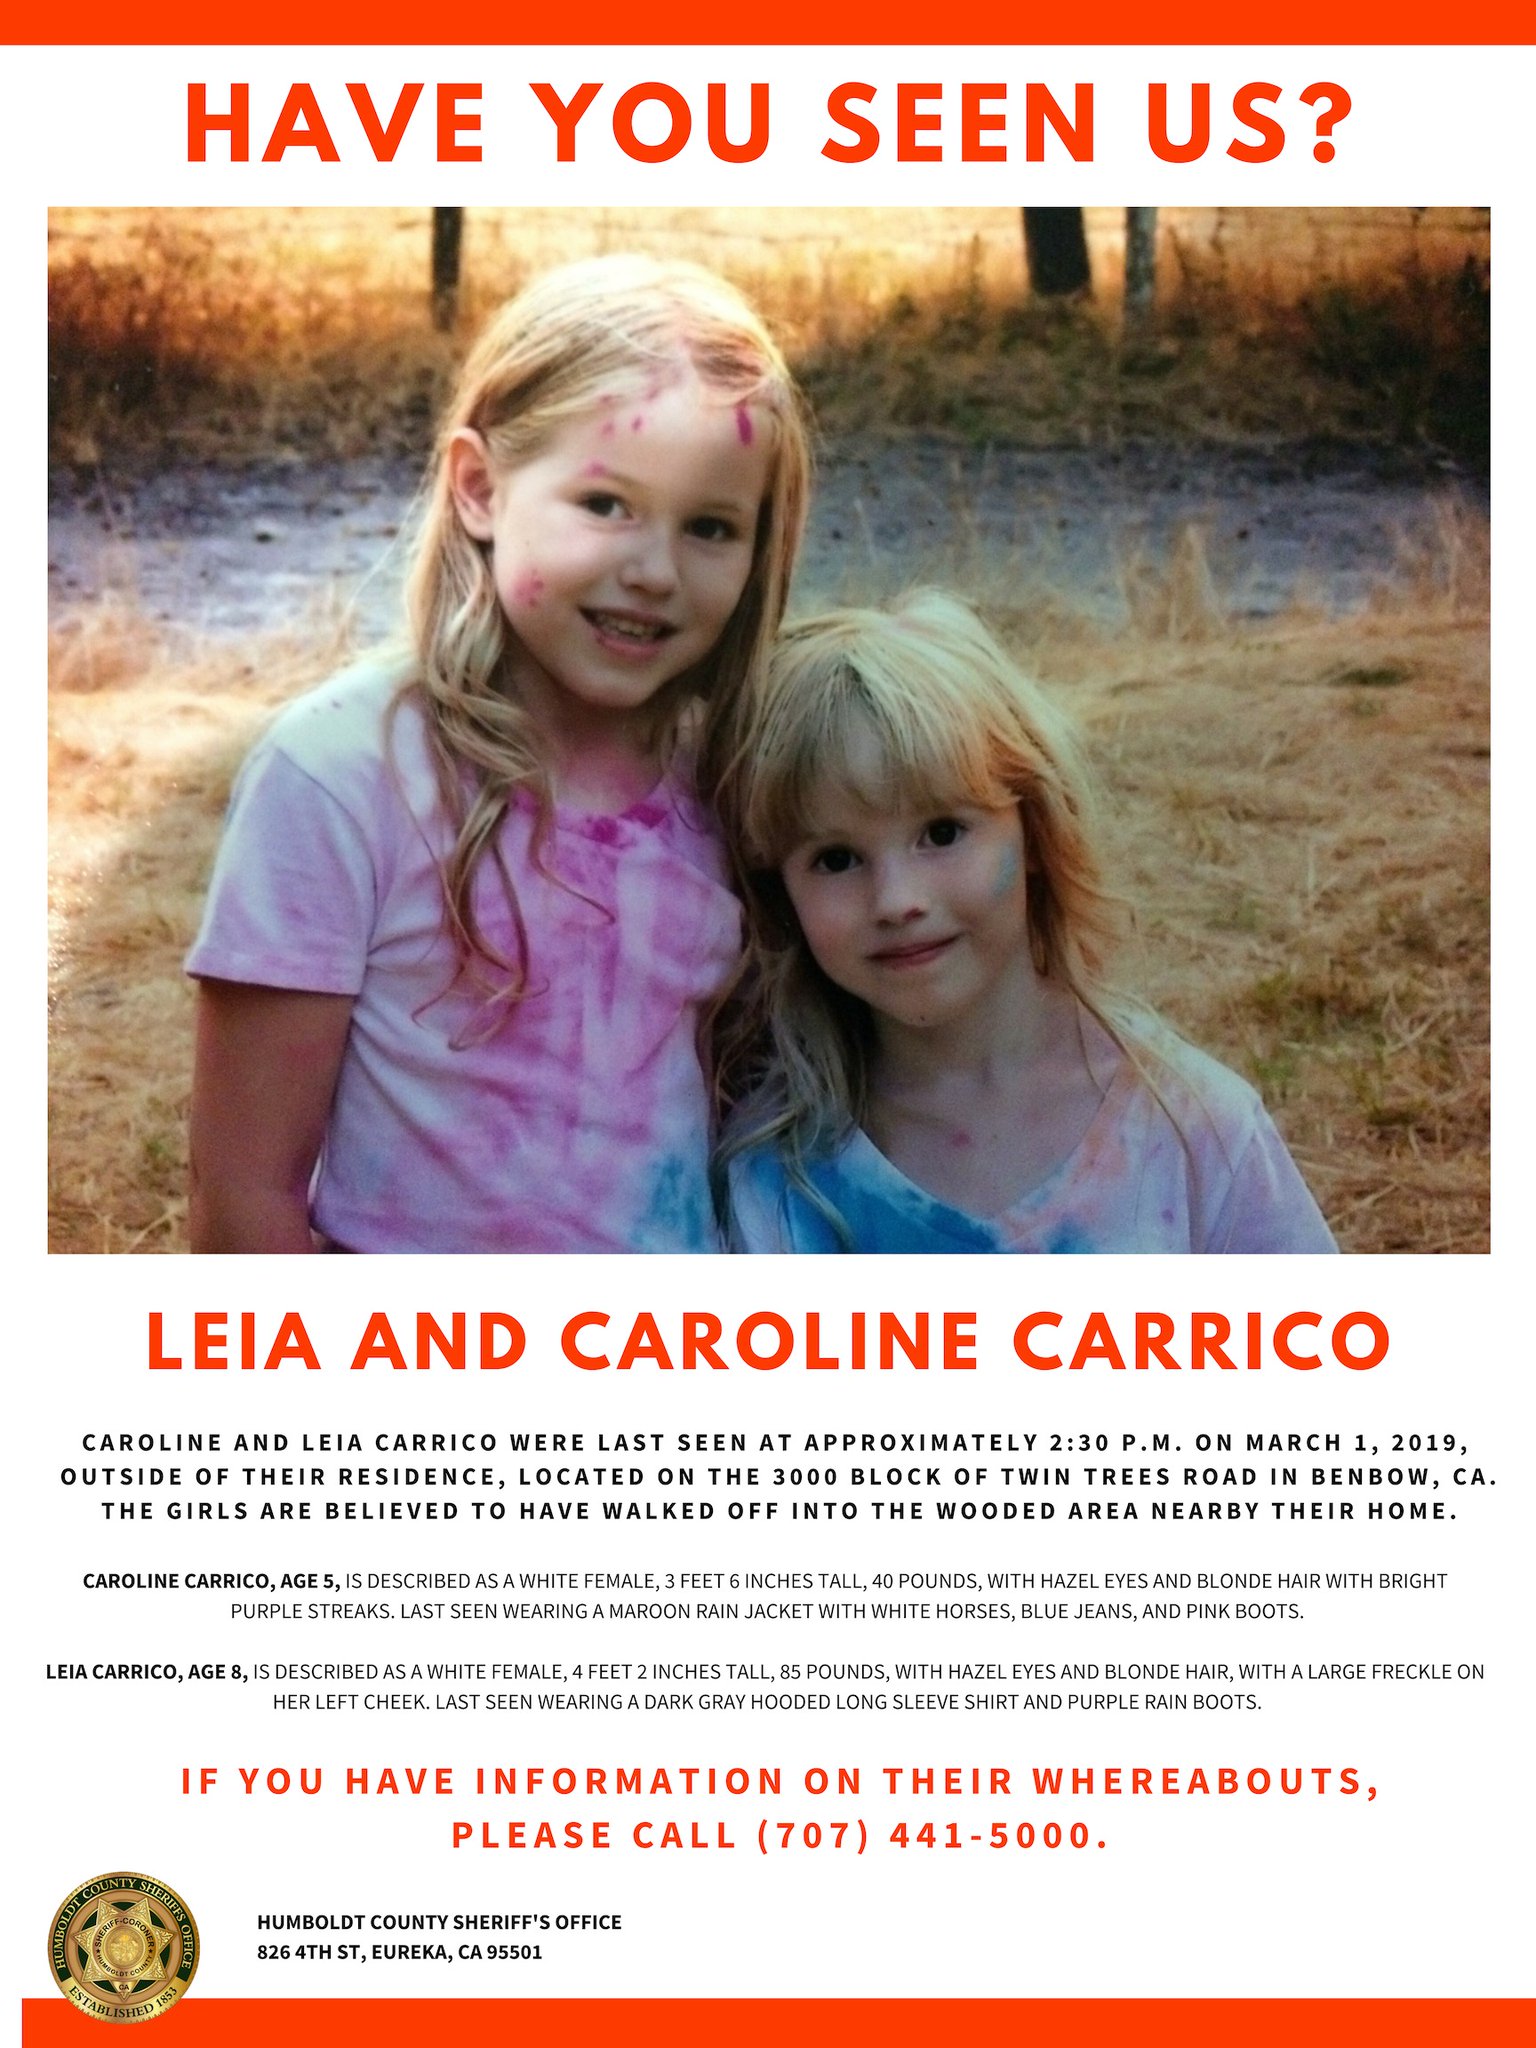 PHOTO: A search is on in Humboldt County for 8-year-old Leia Carrico and her 5-year-old sister, Caroline Carrico, who went missing on March 1, 2019, after wandering away from their home in Benbow, Calif. 